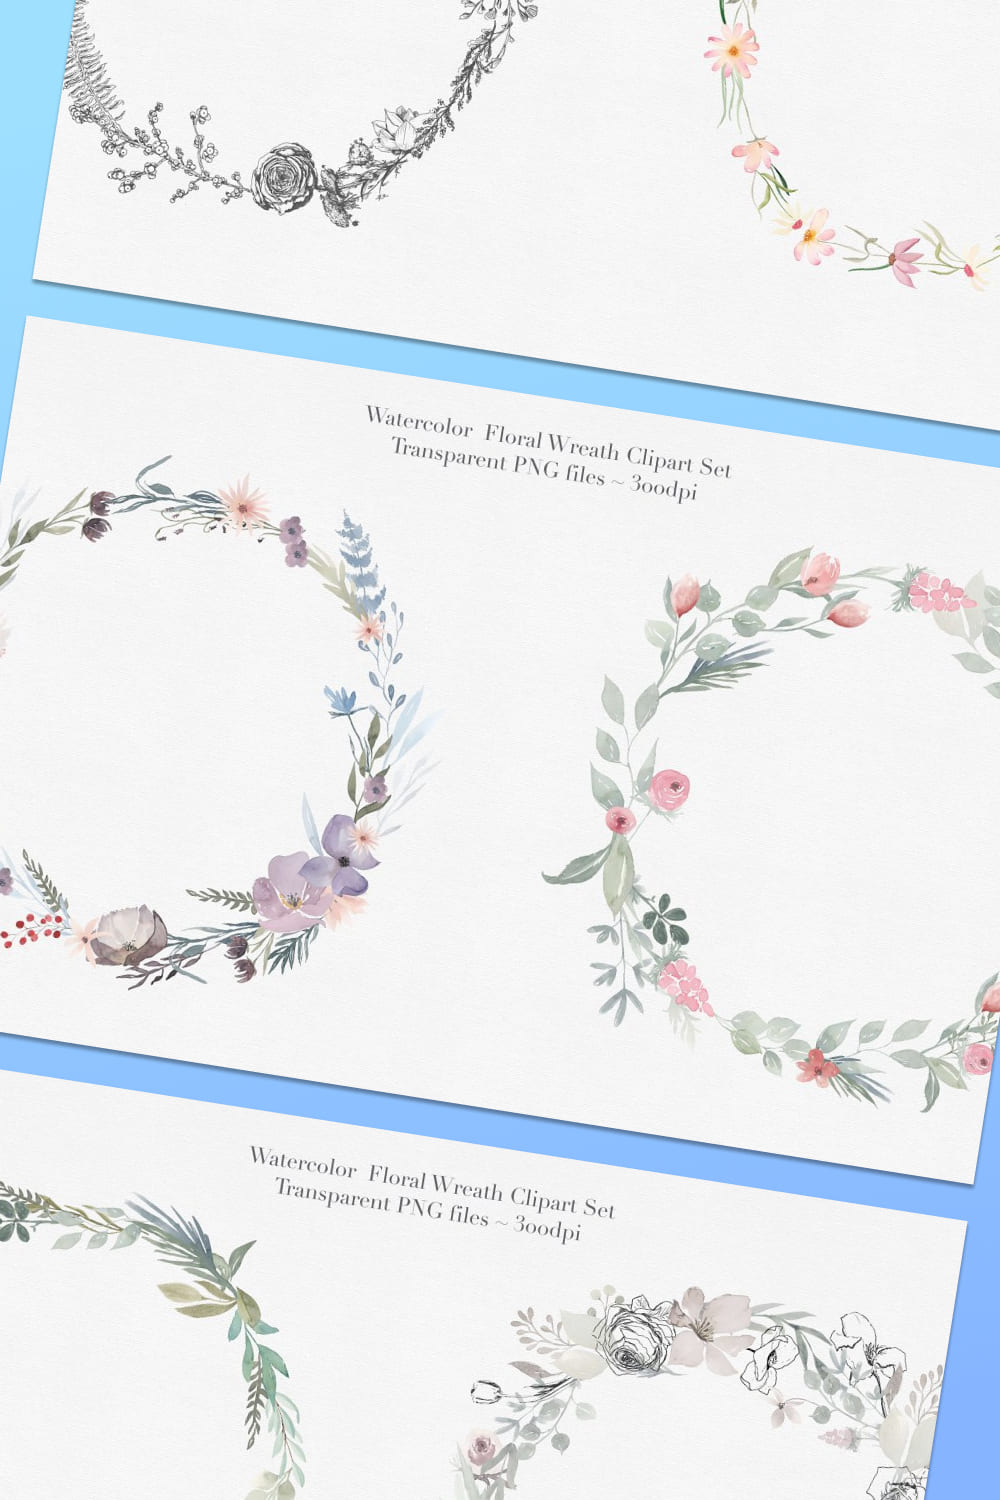 watercolor floral wreaths with nice flowers and leaves.